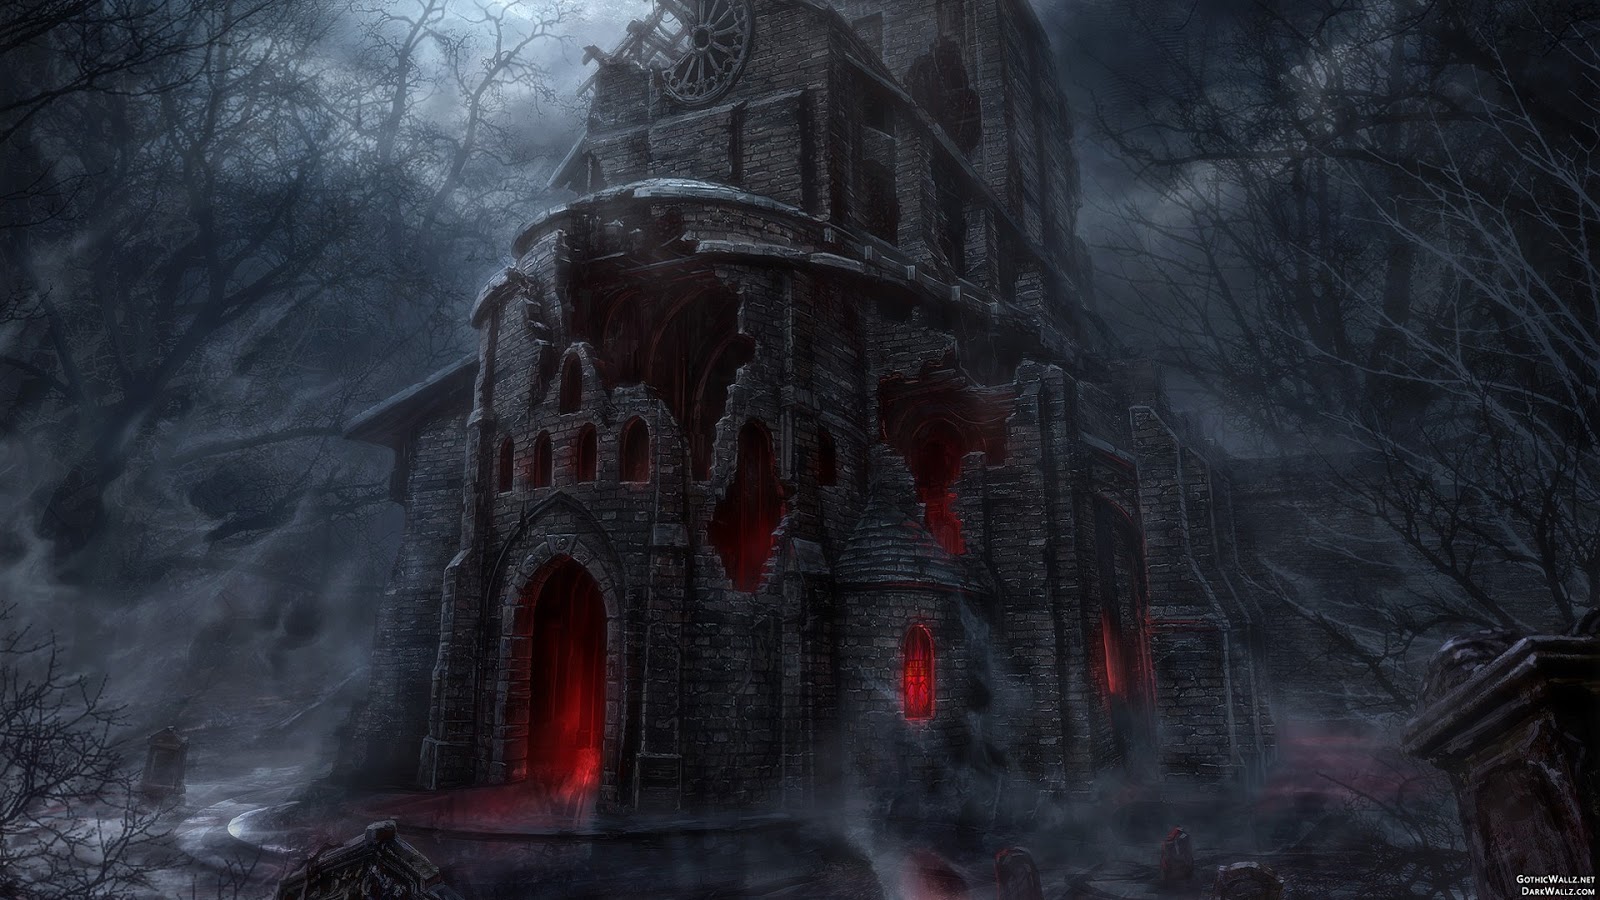 Dark Halloween Scary Gothic House HD Desktop Wallpaper Image And